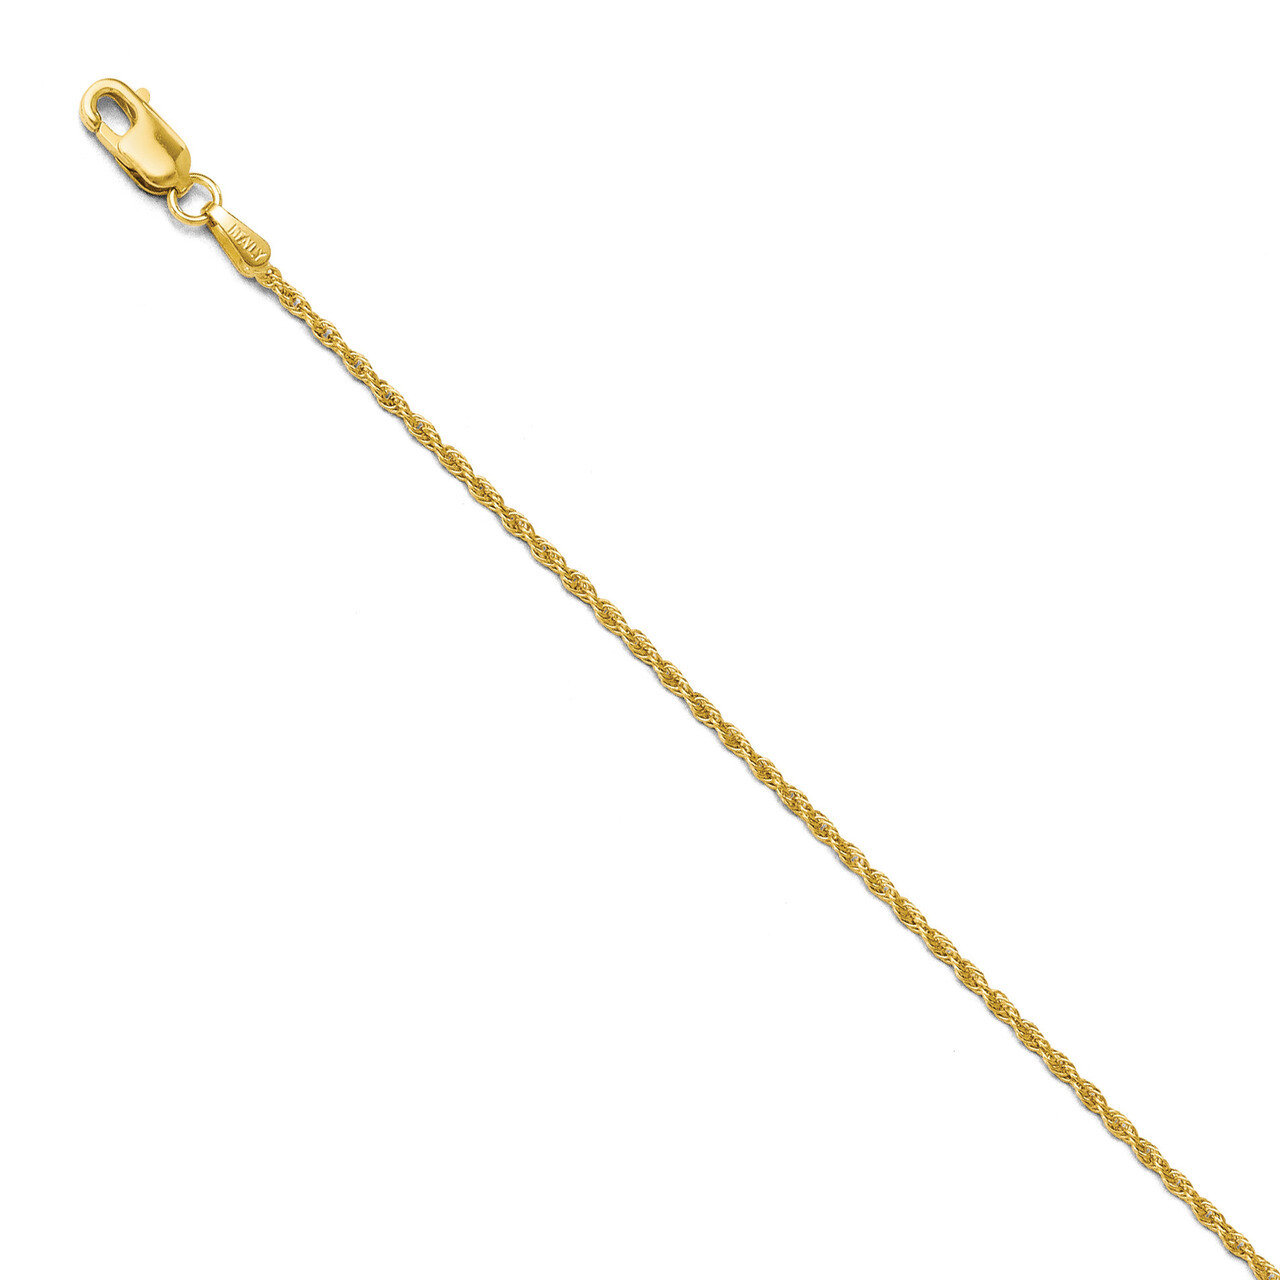 Pendant Rope Chain 24 Inch - 14k Gold HB-727-24